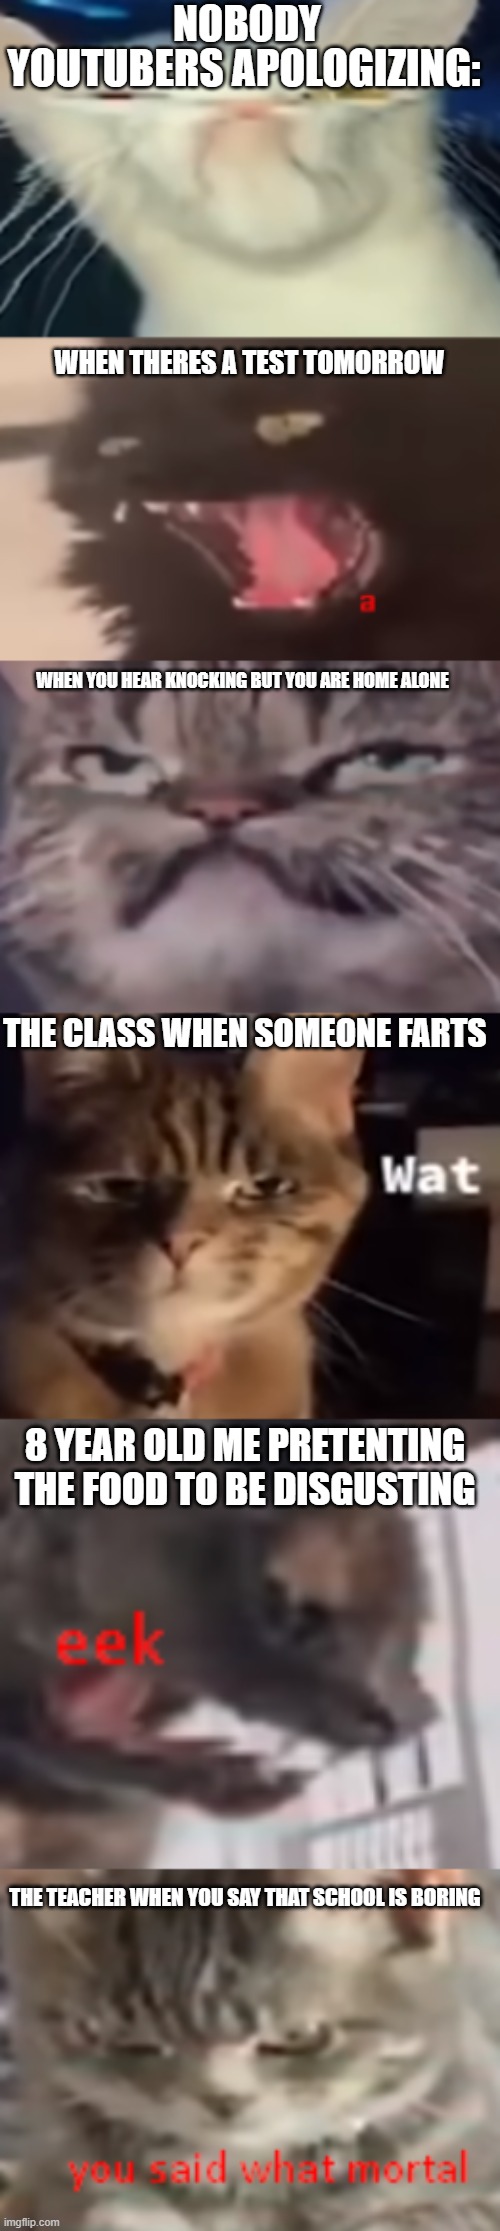 some cat memes |  NOBODY; YOUTUBERS APOLOGIZING:; WHEN THERES A TEST TOMORROW; WHEN YOU HEAR KNOCKING BUT YOU ARE HOME ALONE; THE CLASS WHEN SOMEONE FARTS; 8 YEAR OLD ME PRETENTING THE FOOD TO BE DISGUSTING; THE TEACHER WHEN YOU SAY THAT SCHOOL IS BORING | image tagged in cat memes,funny,memes,cat meme,funny cat memes,stop reading tags | made w/ Imgflip meme maker